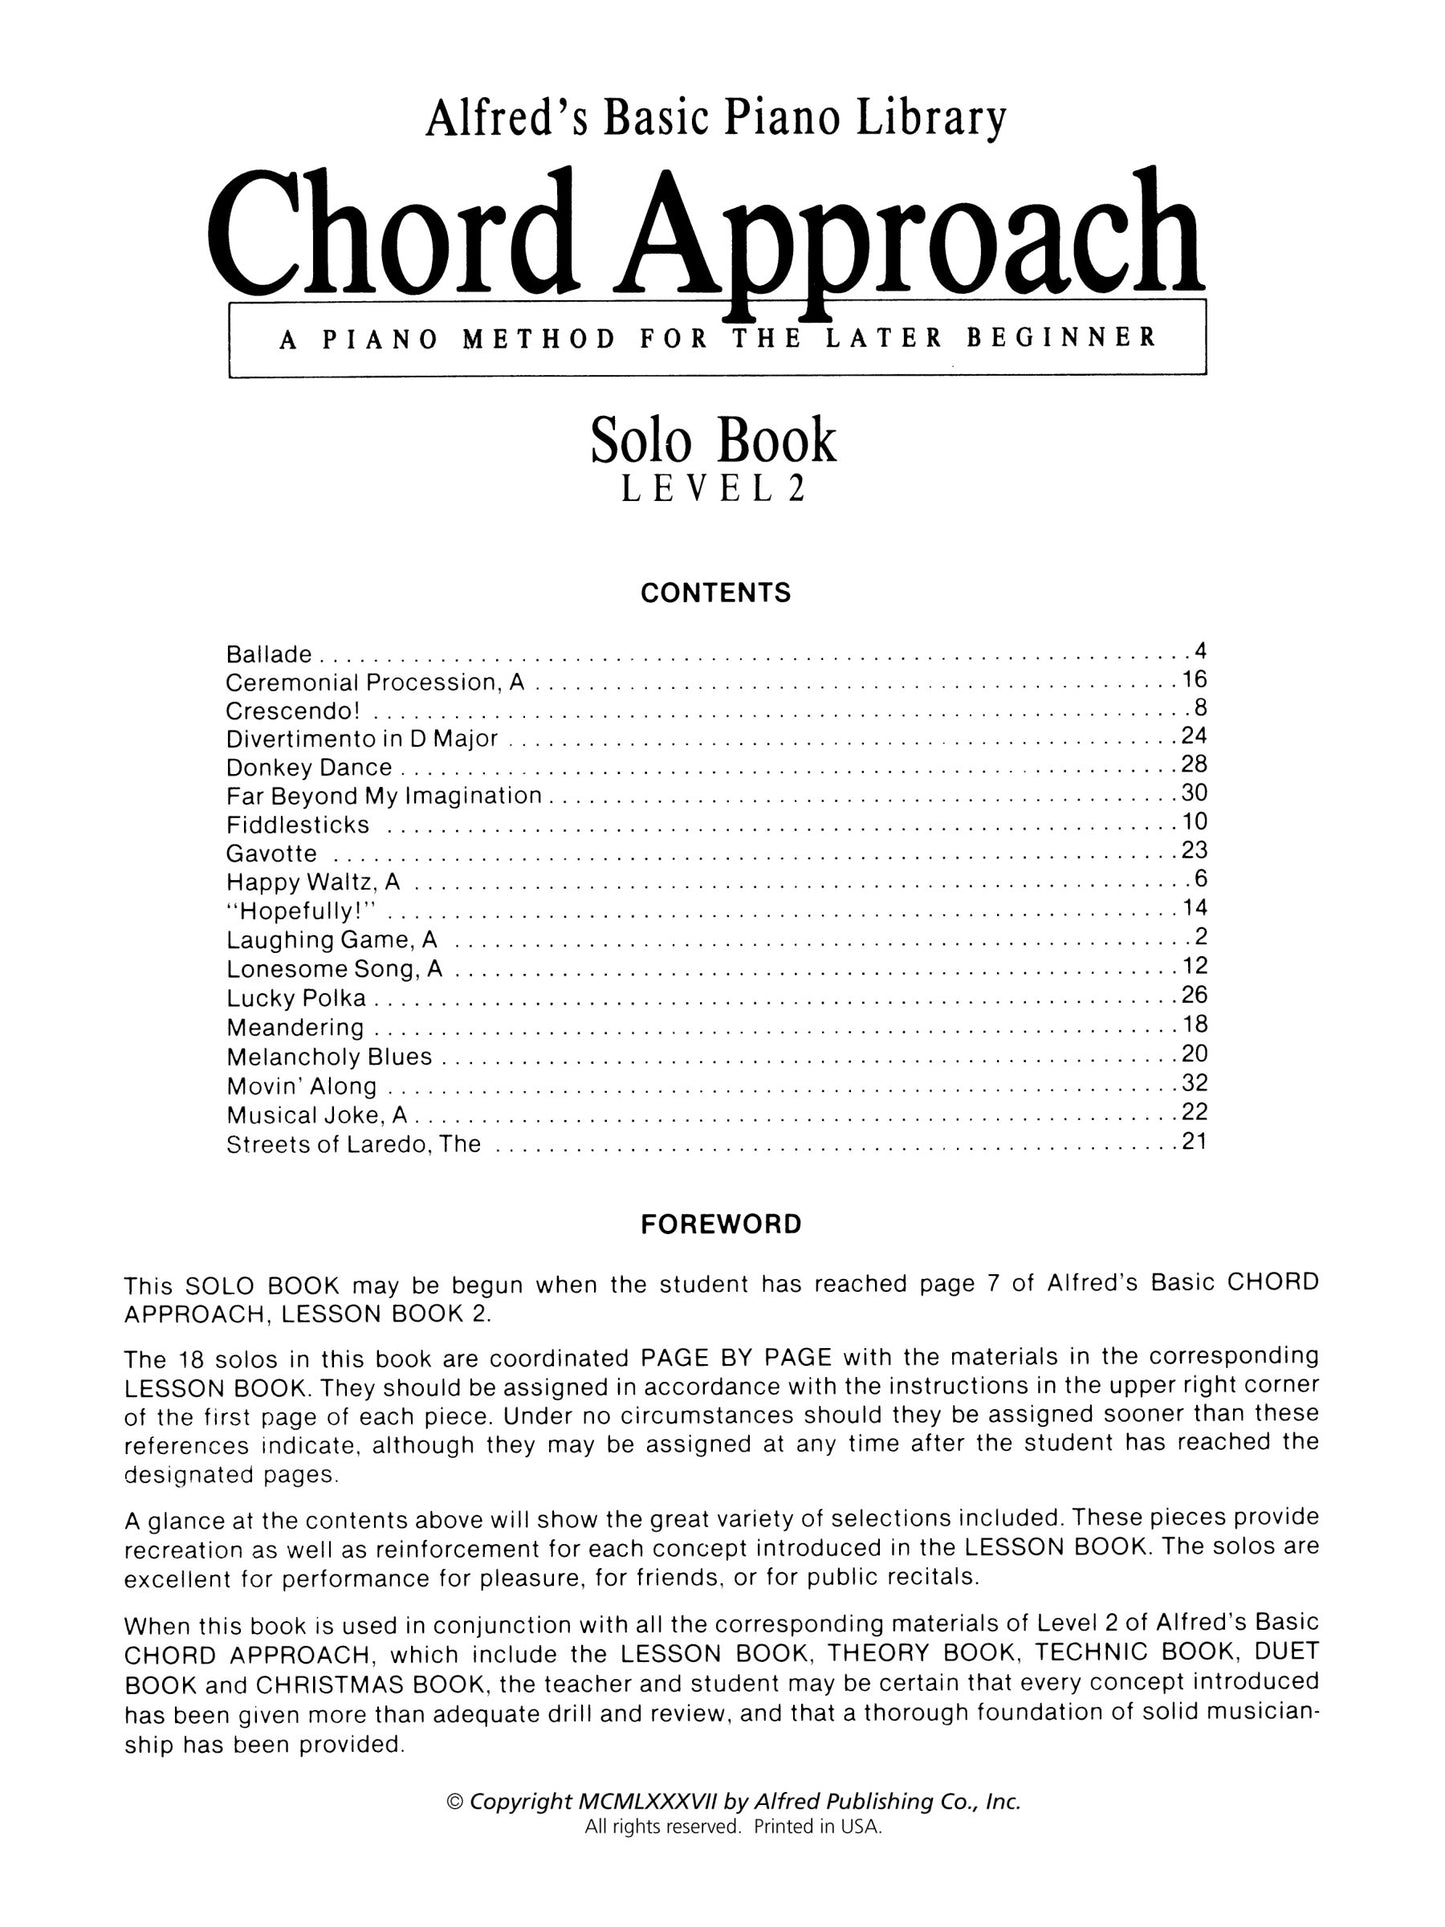 Alfred's Basic Piano Library - Chord Approach Solo Book Level 2